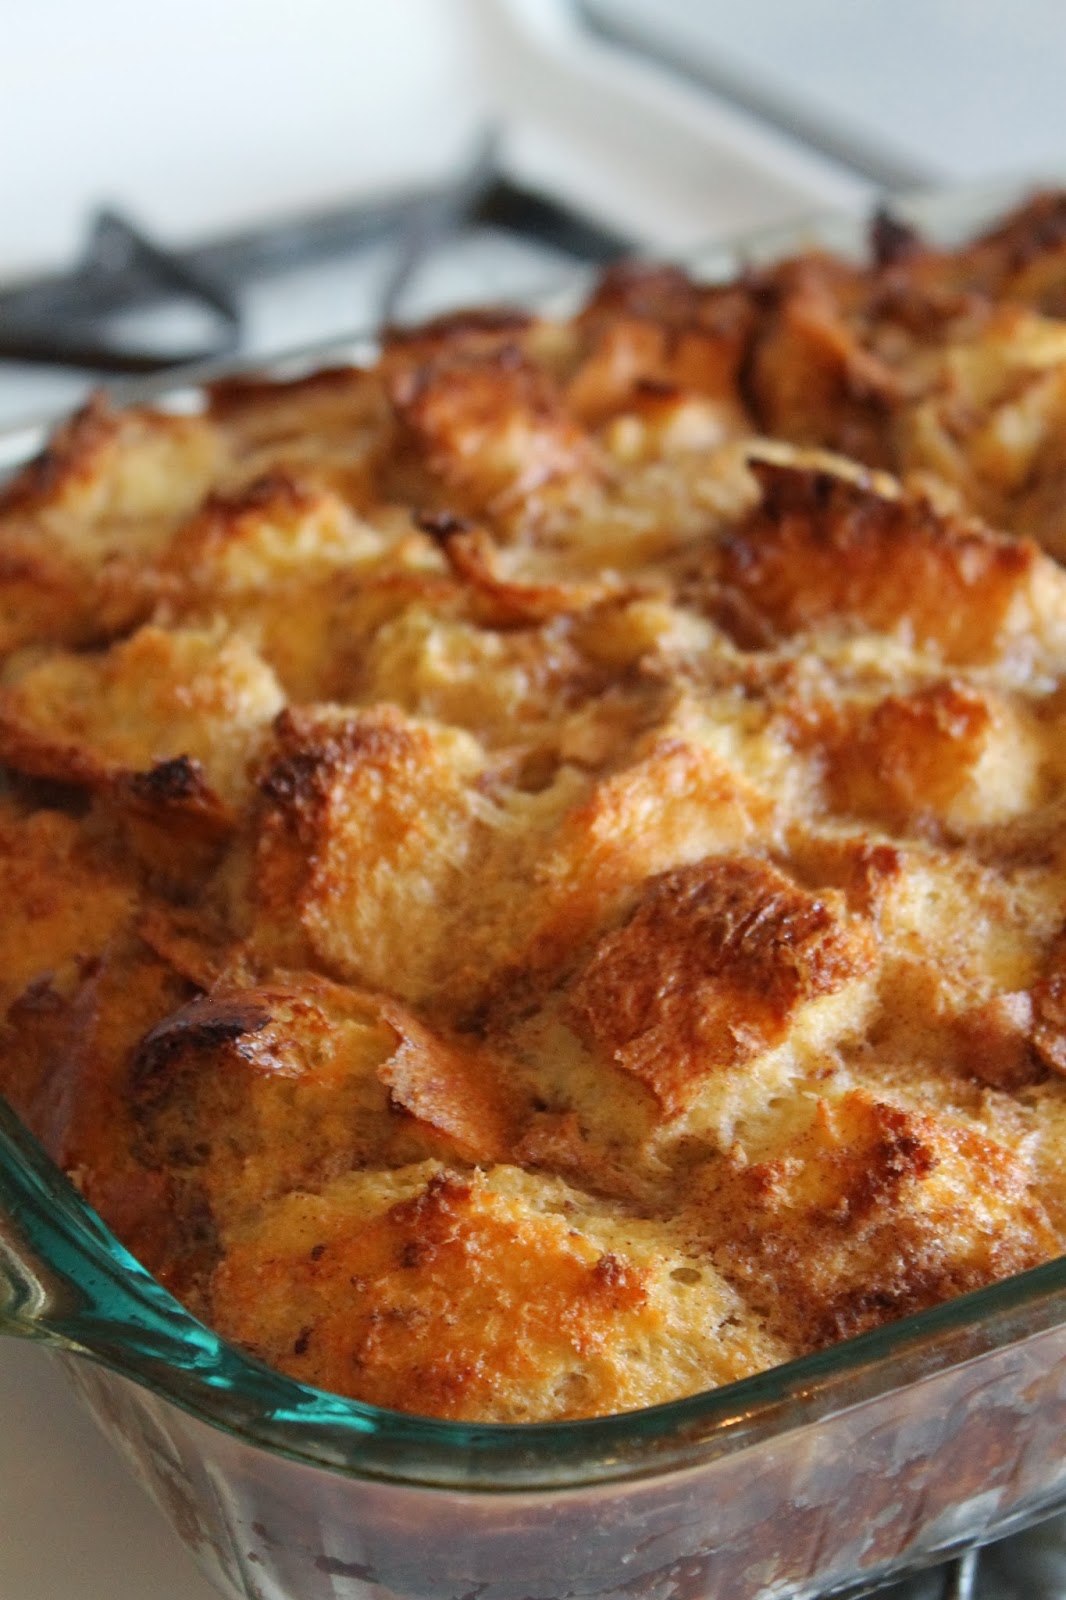 Cook and Craft Me Crazy: Basic Bread Pudding with Strawberry Sauce